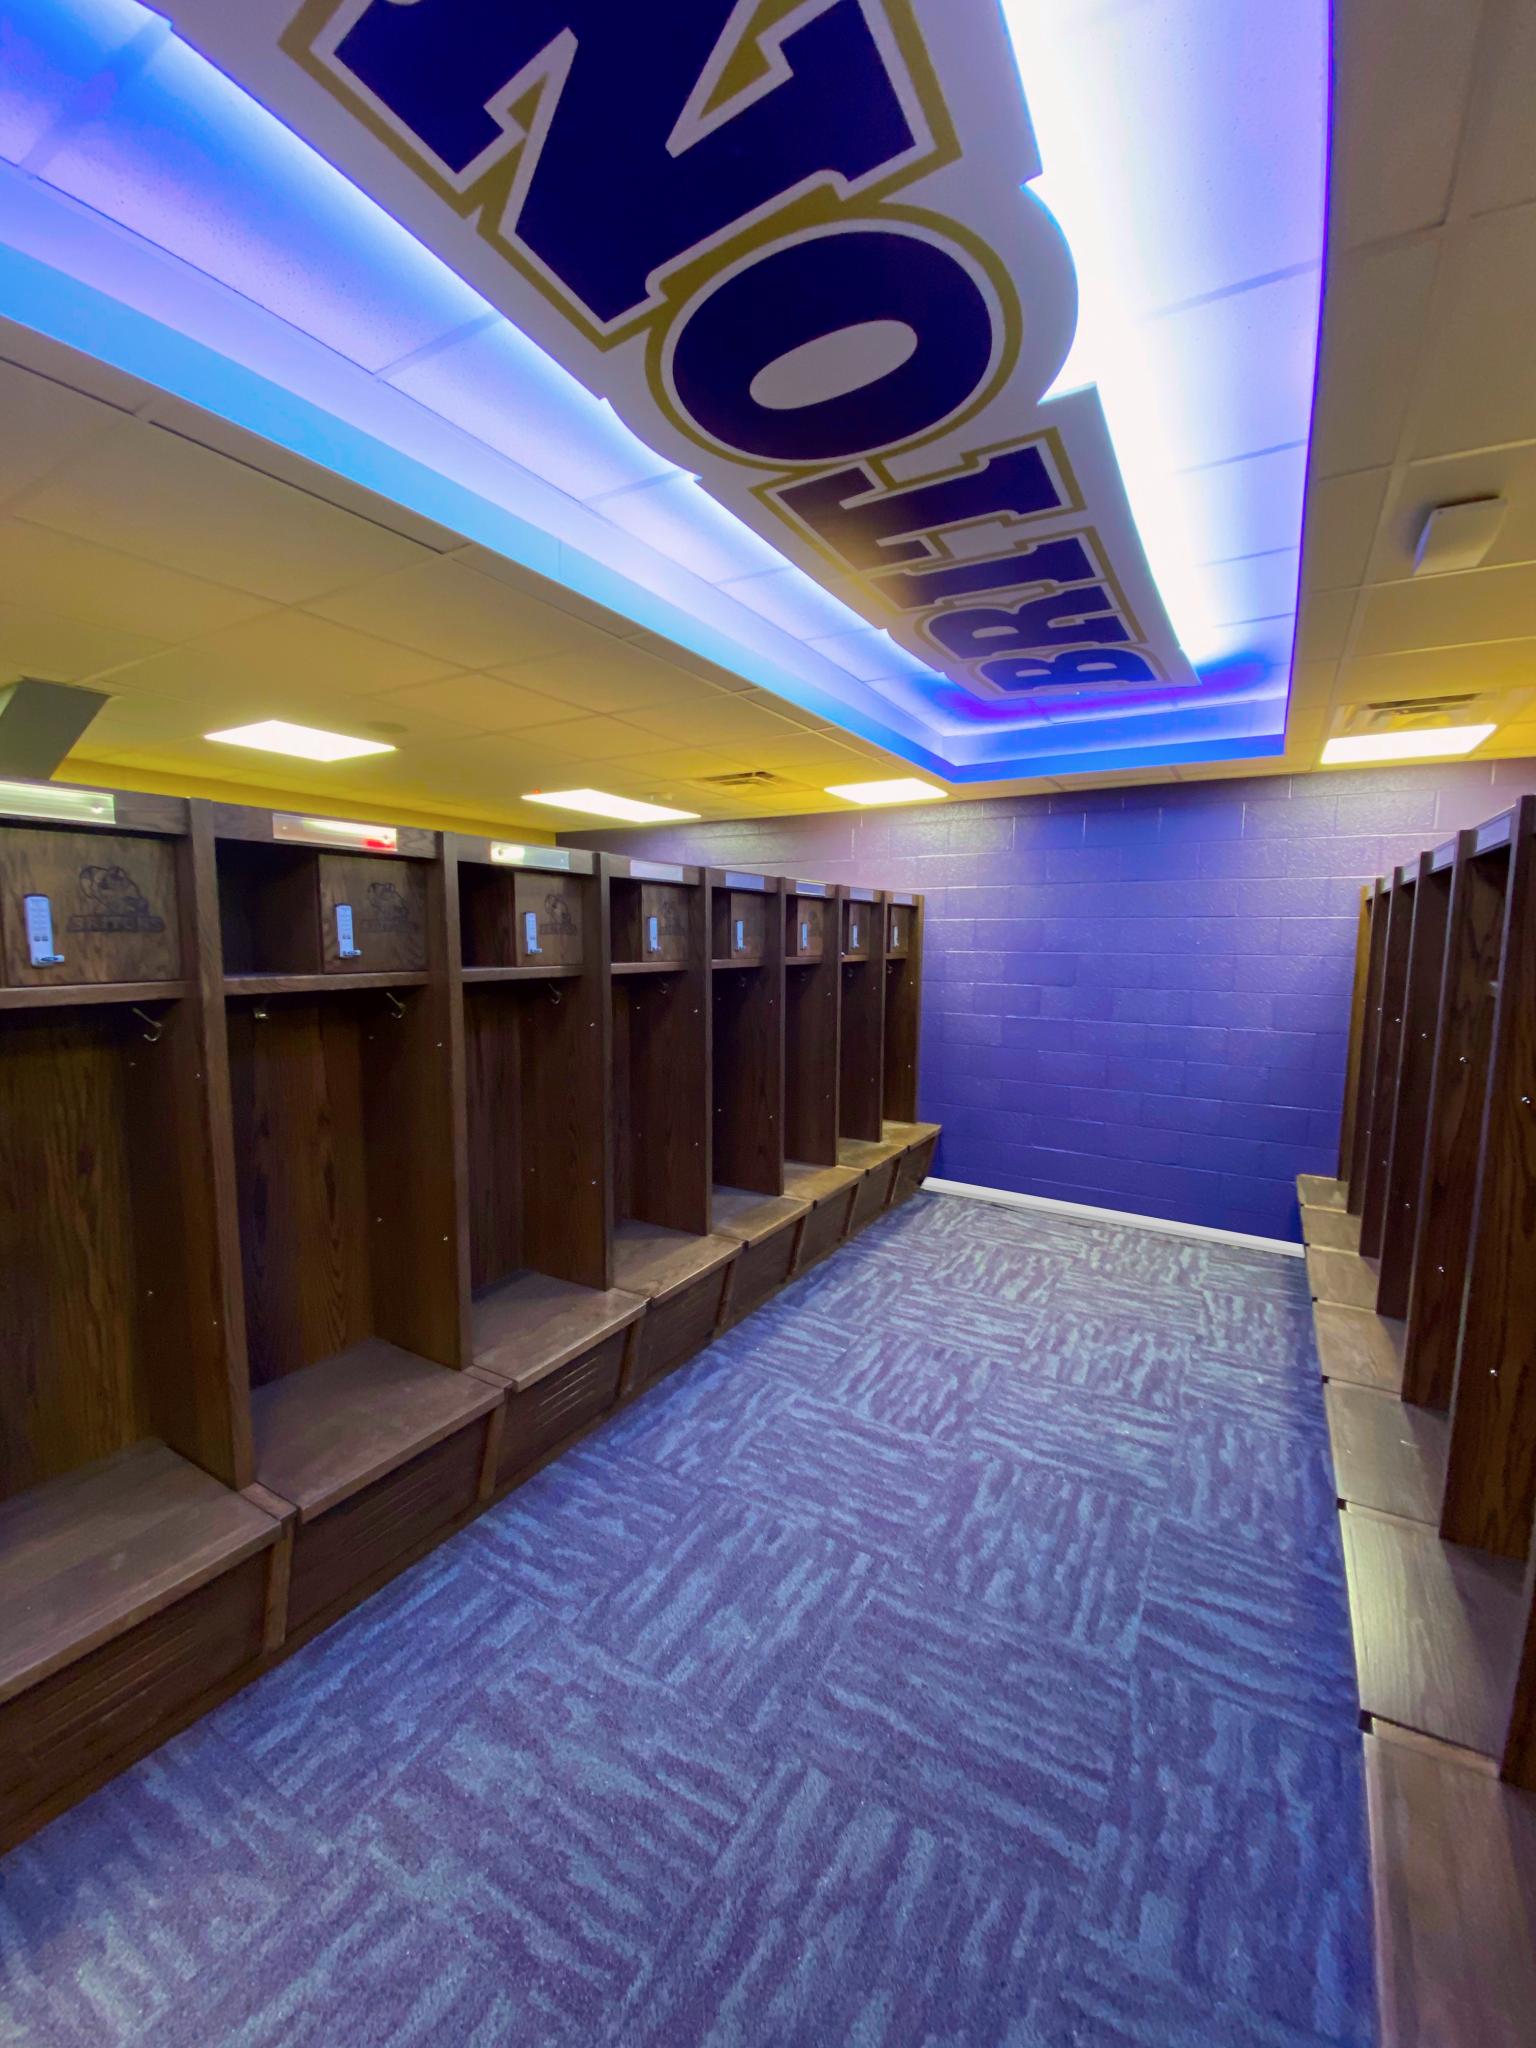 image of purple carpet and set of wooden lockers